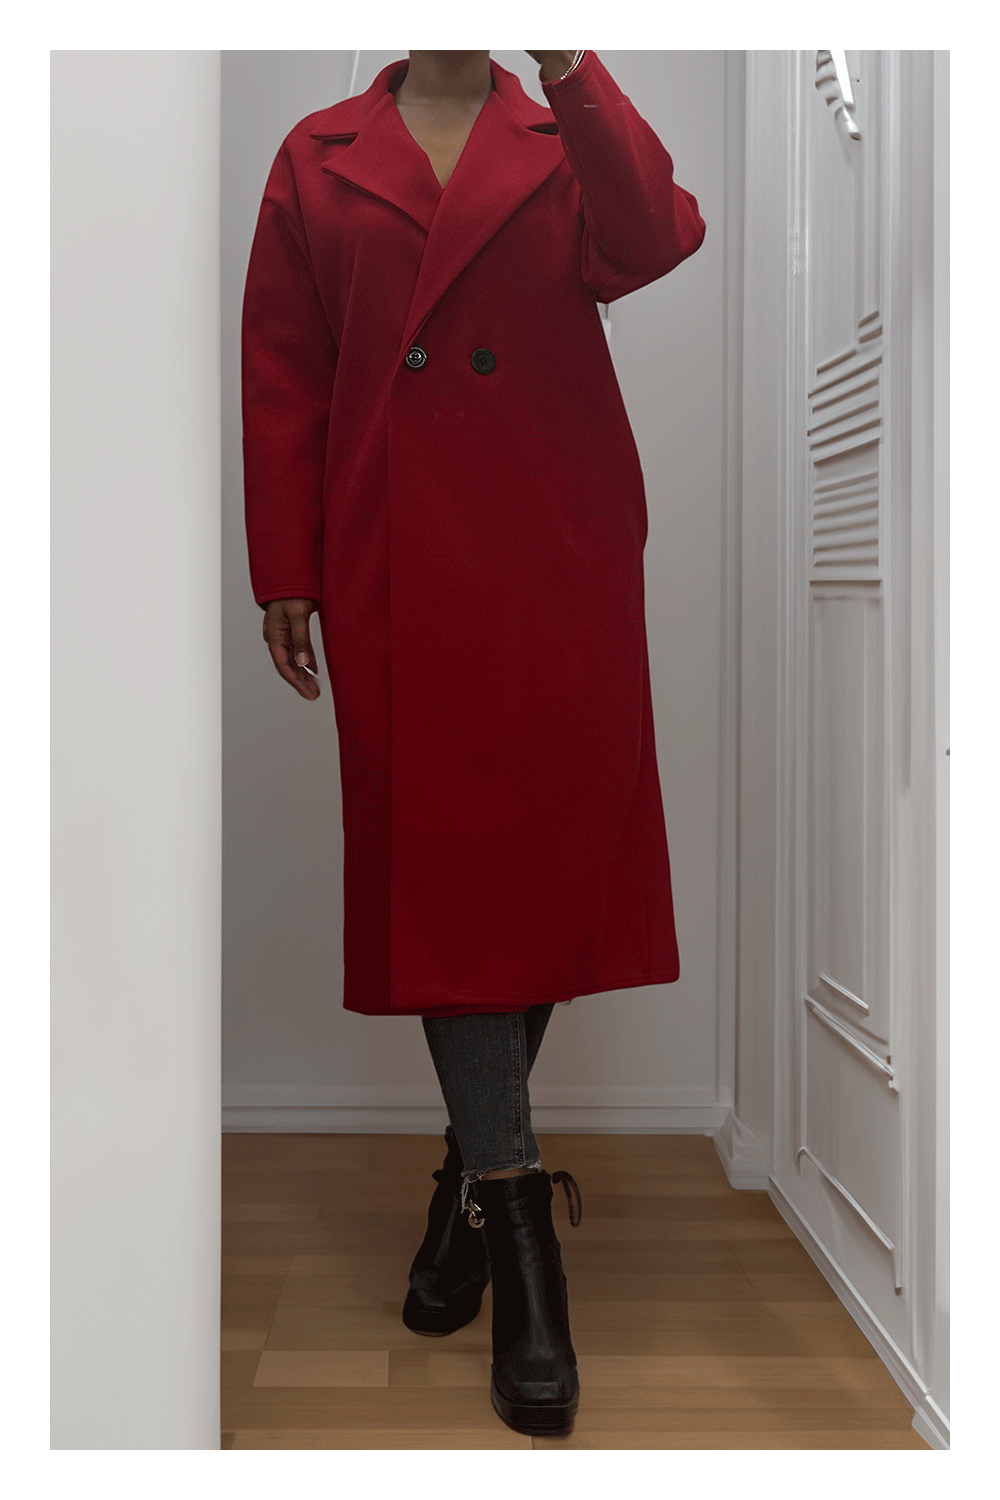 Long flowing red trench coat